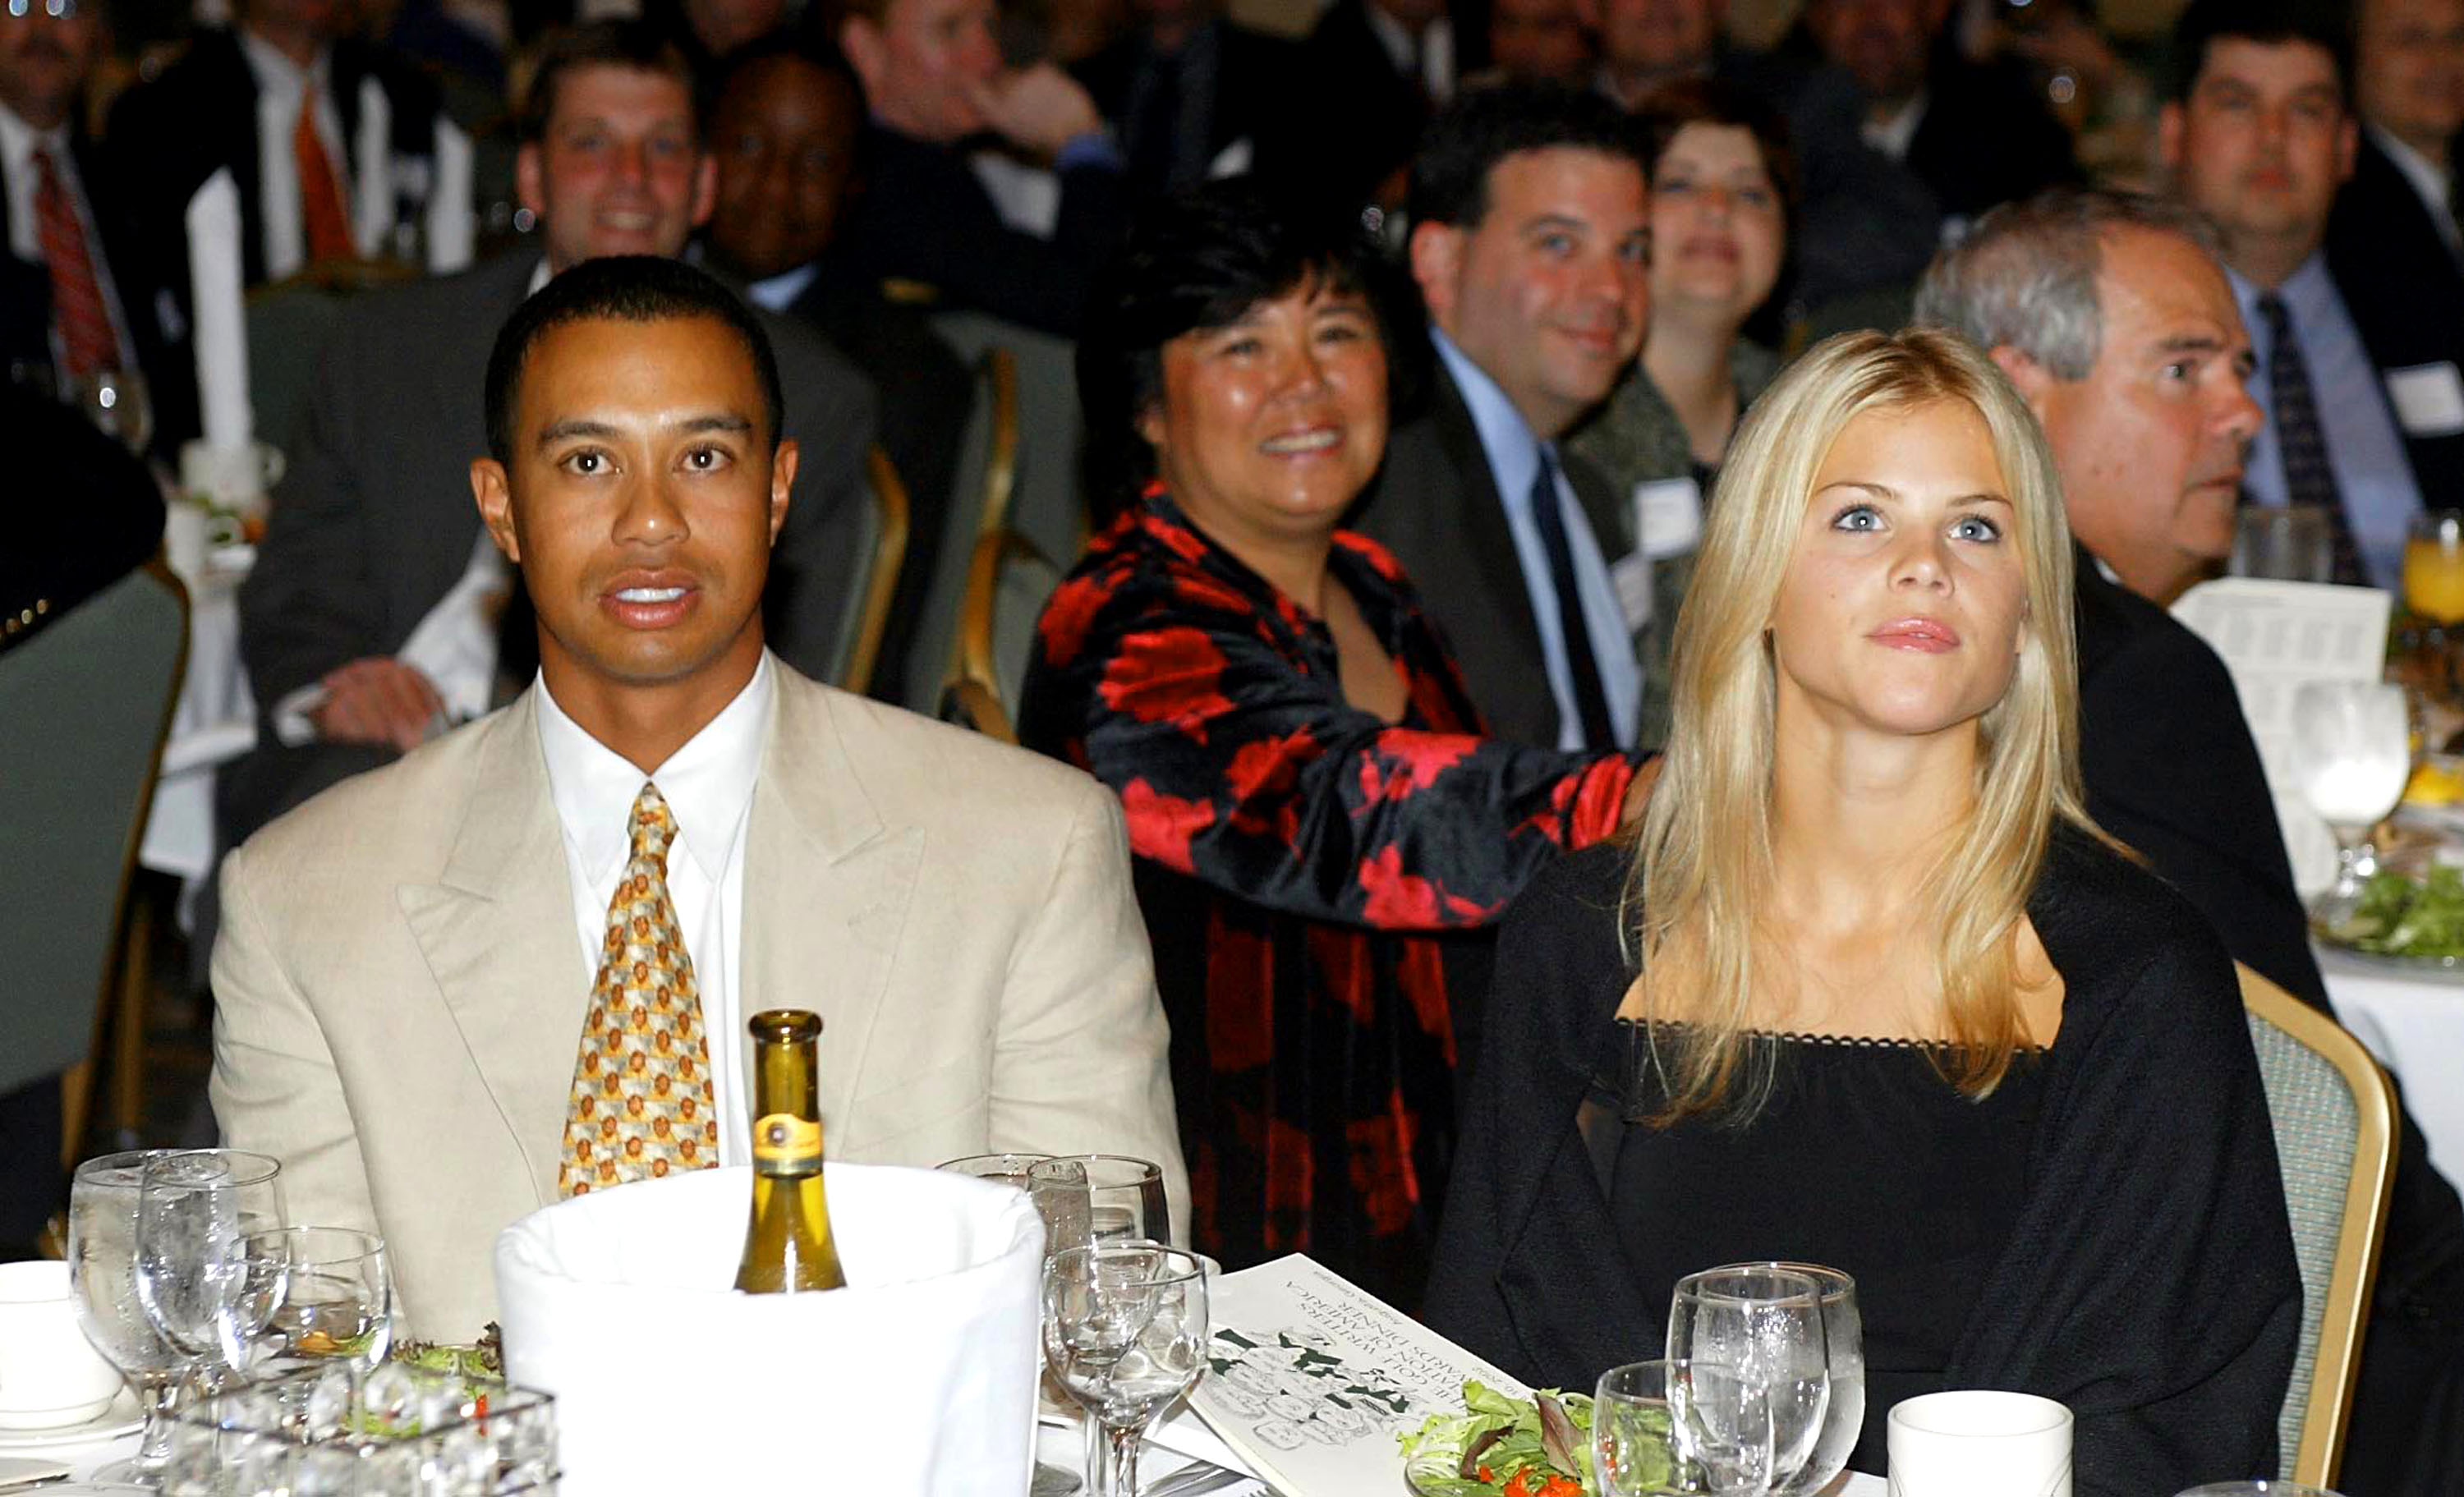 <p><a href="https://www.wonderwall.com/celebrity/profiles/overview/tiger-woods-705.article">Tiger Woods</a> was the poster child for perfection until a story broke in December 2009 alleging that he was having an affair with socialite Rachel Uchitel. One by one, multiple women came forward to reveal that they, too, had slept with the golf legend. Tiger's then-wife, Elin Nordegren, soon filed for divorce.</p>